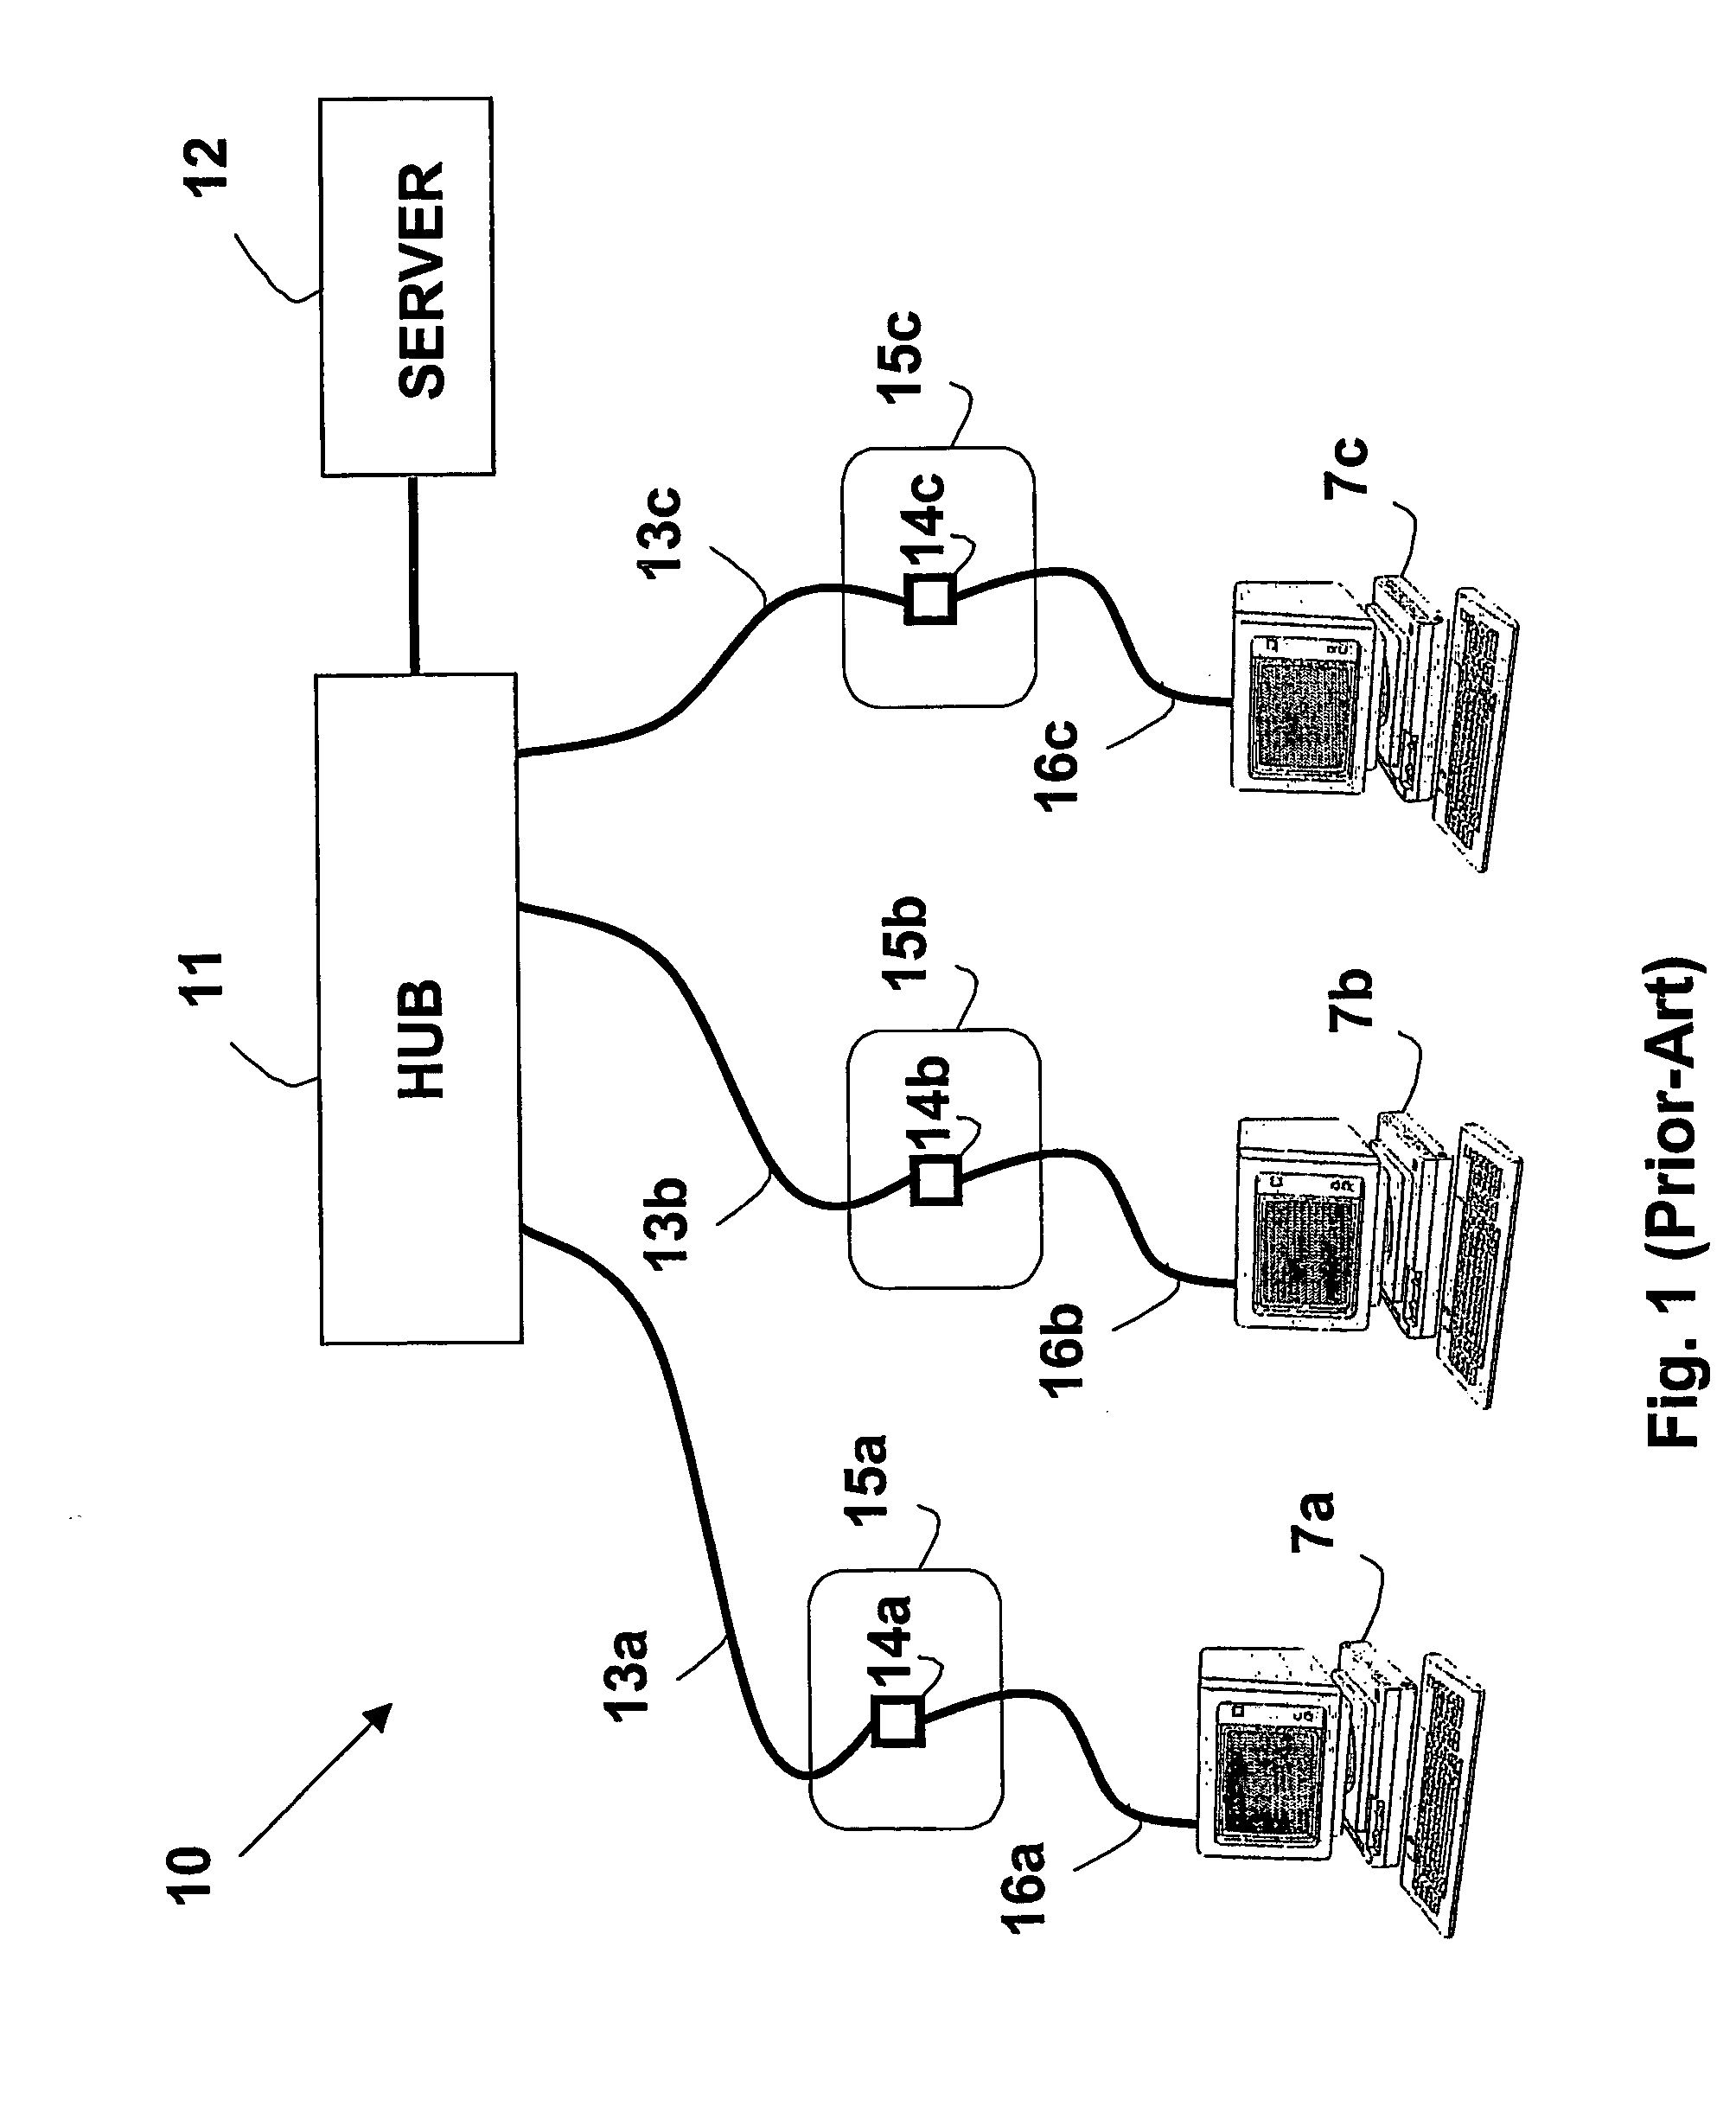 Outlet with analog signal adapter, a method for use thereof and a network using said outlet